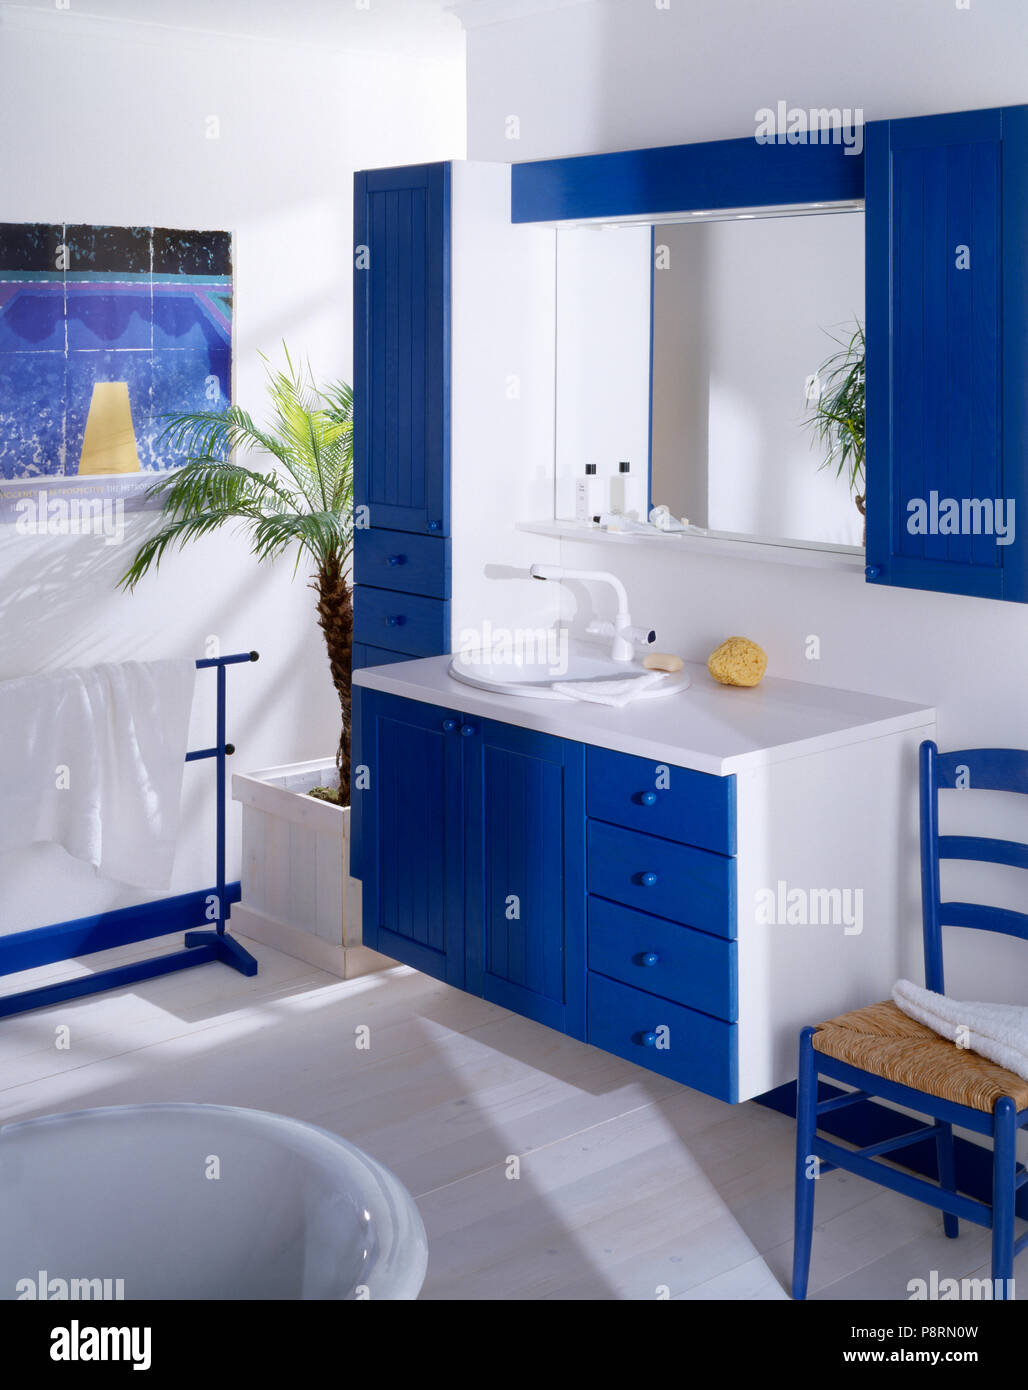 Mirror In Blue Fitted Cabinet Above White Sink In Bluewhite Vanity Unit In Economy Style Bathroom With Painted Wood Floor